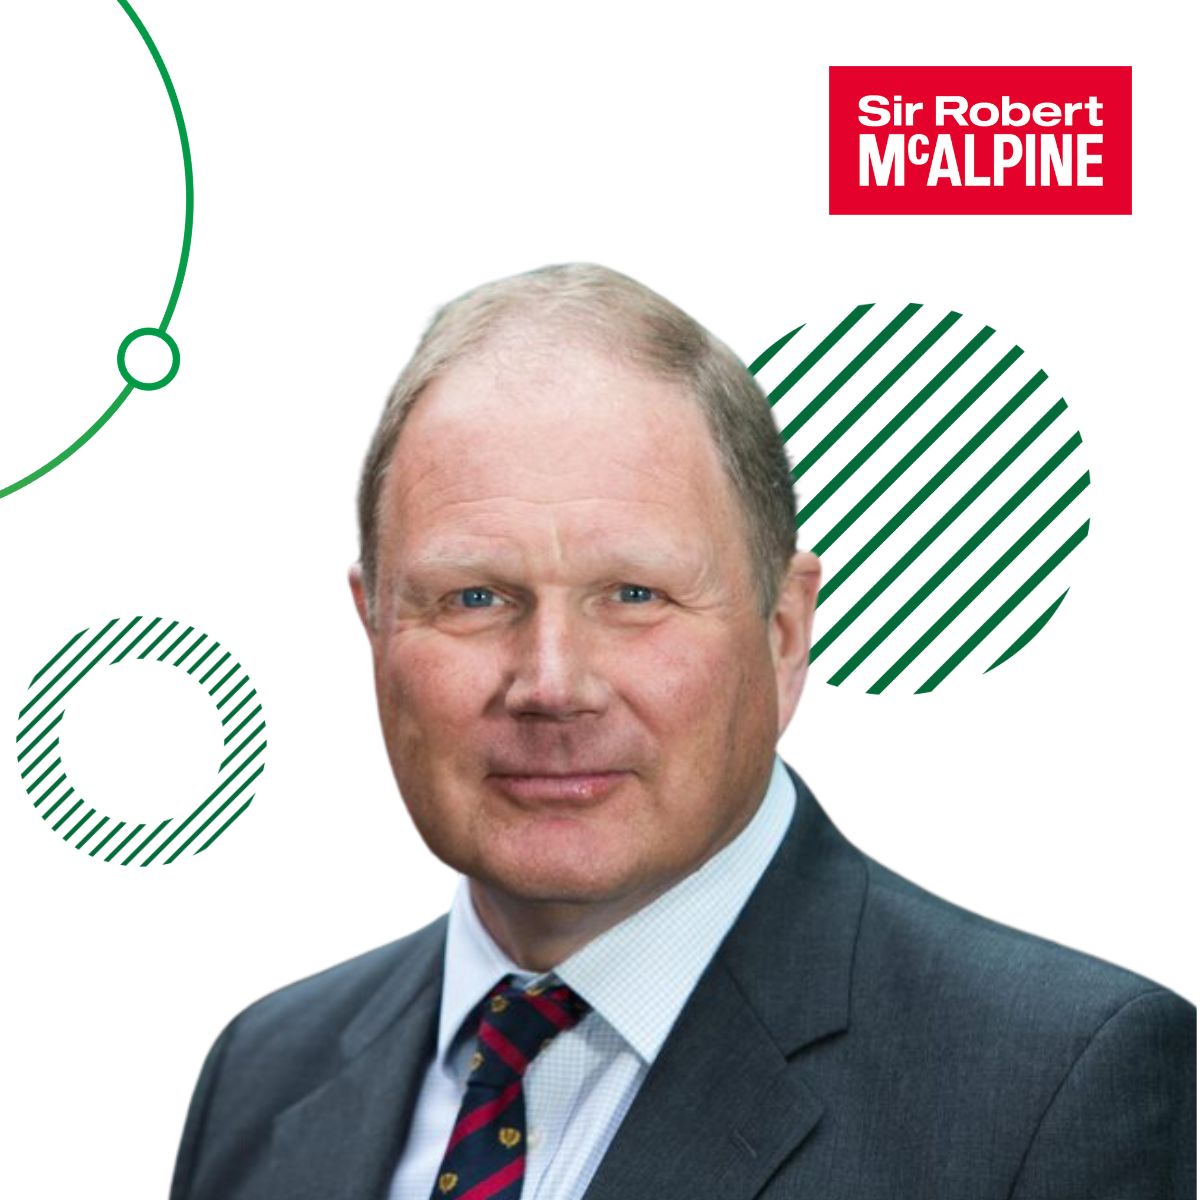 We are pleased to welcome Mike Hickson OBE as @WeAreMcAlpine Managing Director of Defence. 'I look forward to working closely with the team to continue that legacy and deliver world class infrastructure for Defence projects.” Mike. Find out more 👉 srm.com/news-and-comme…